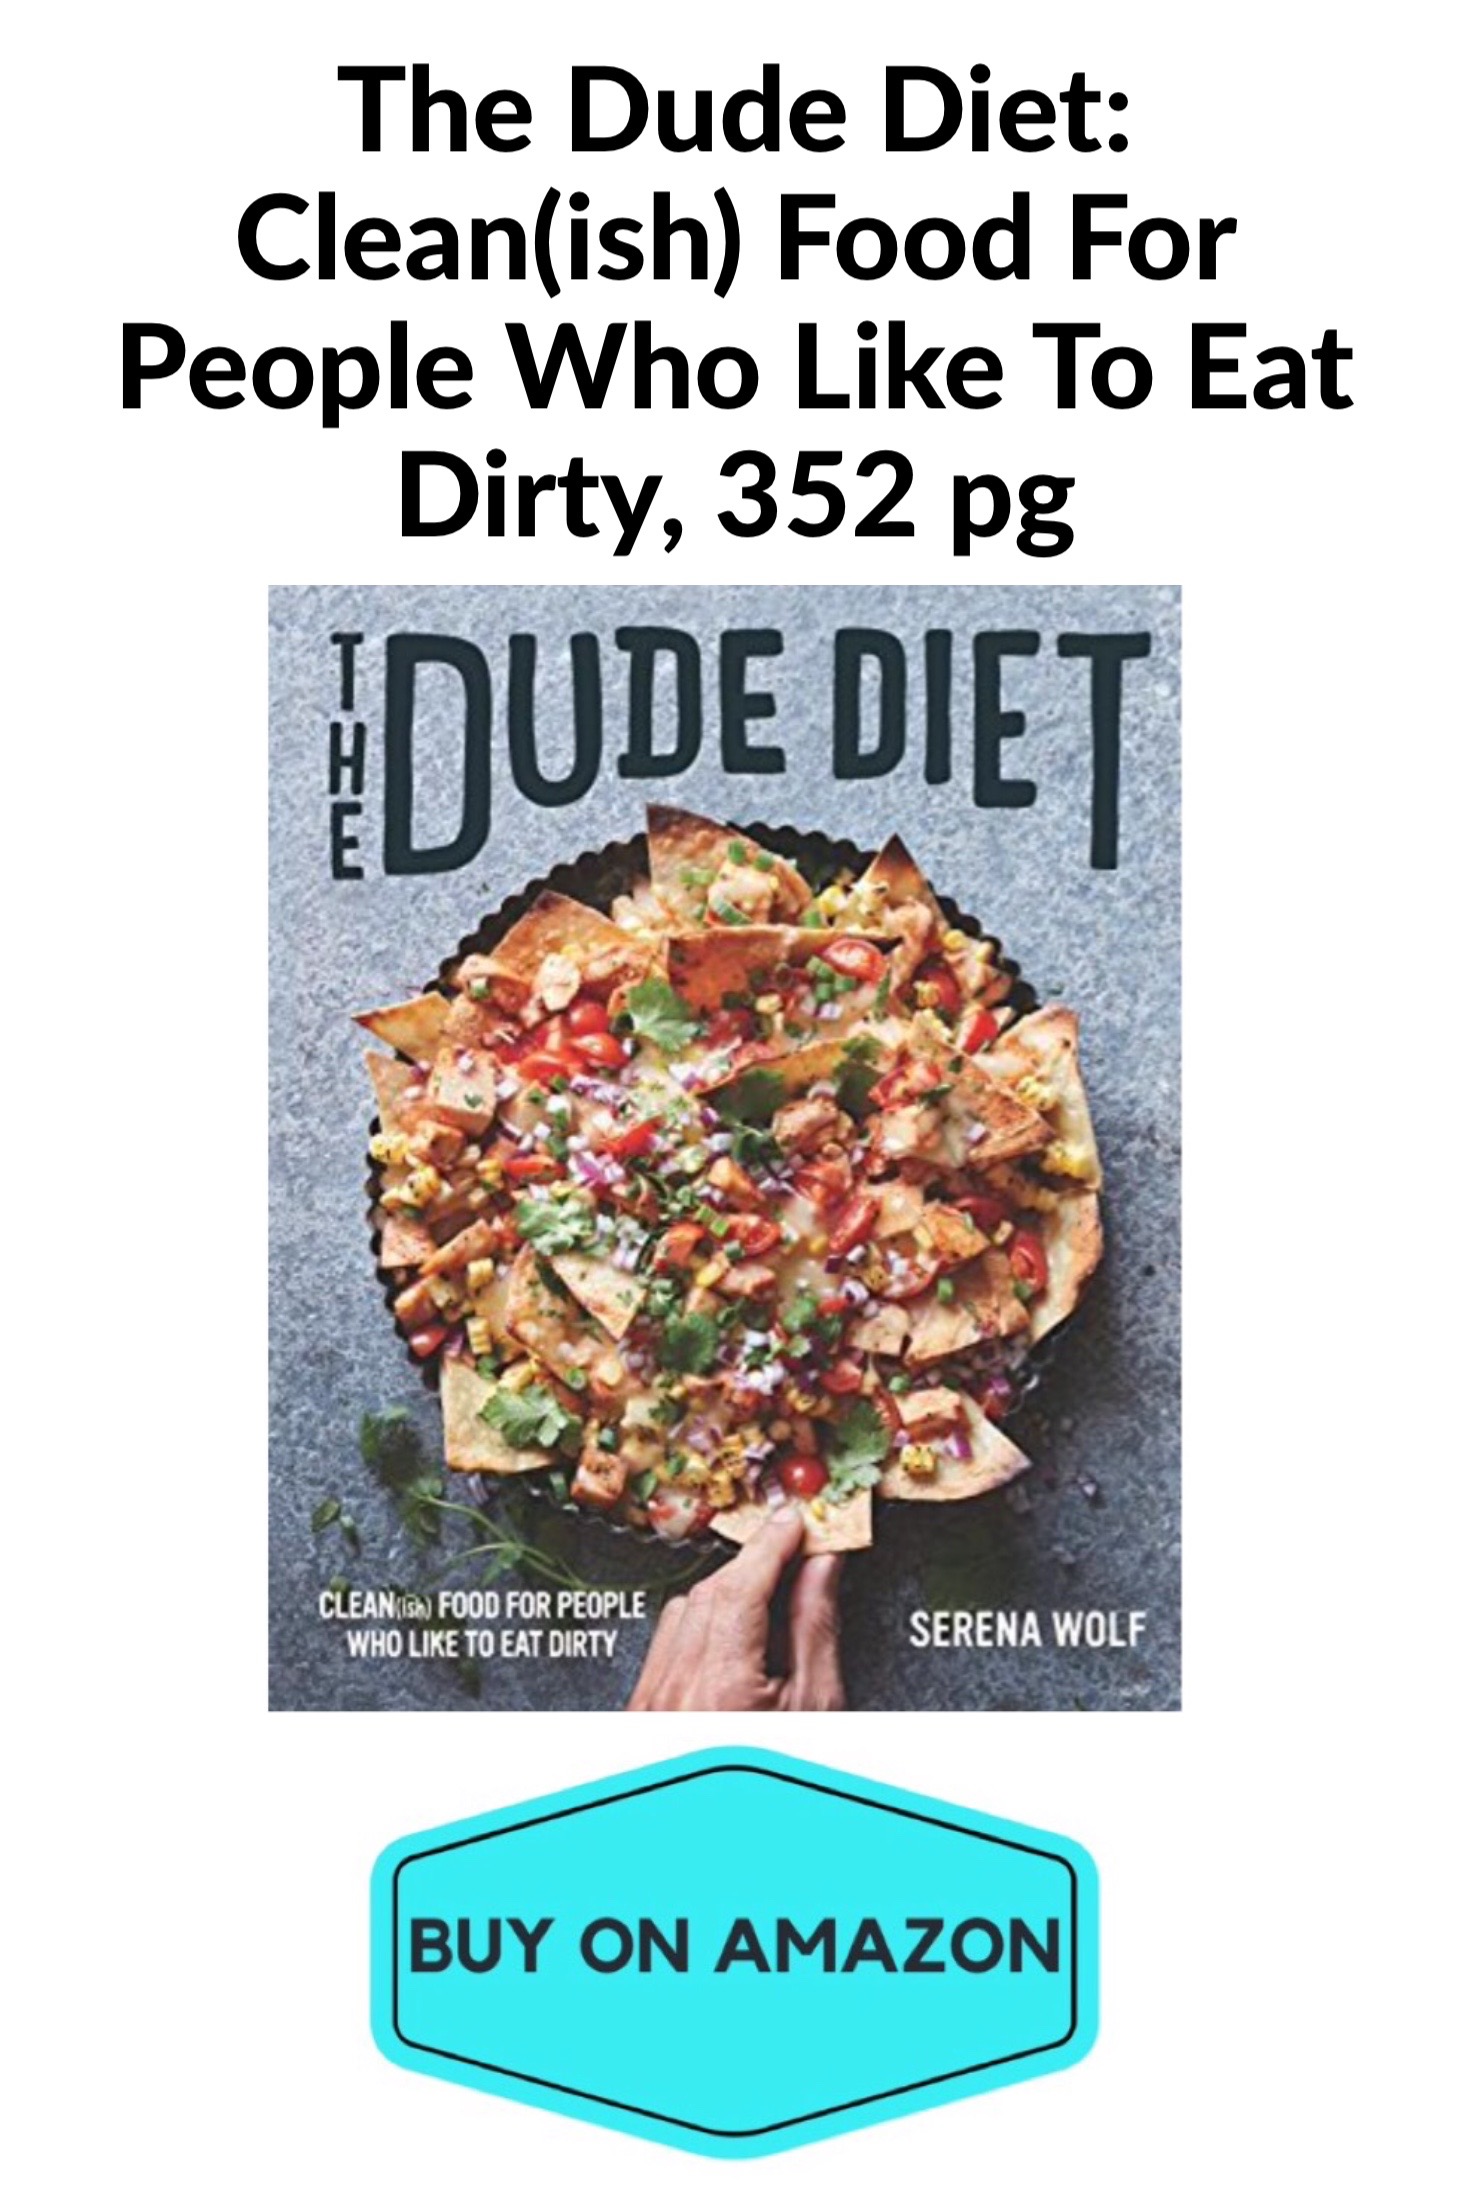 The Dude Diet Book